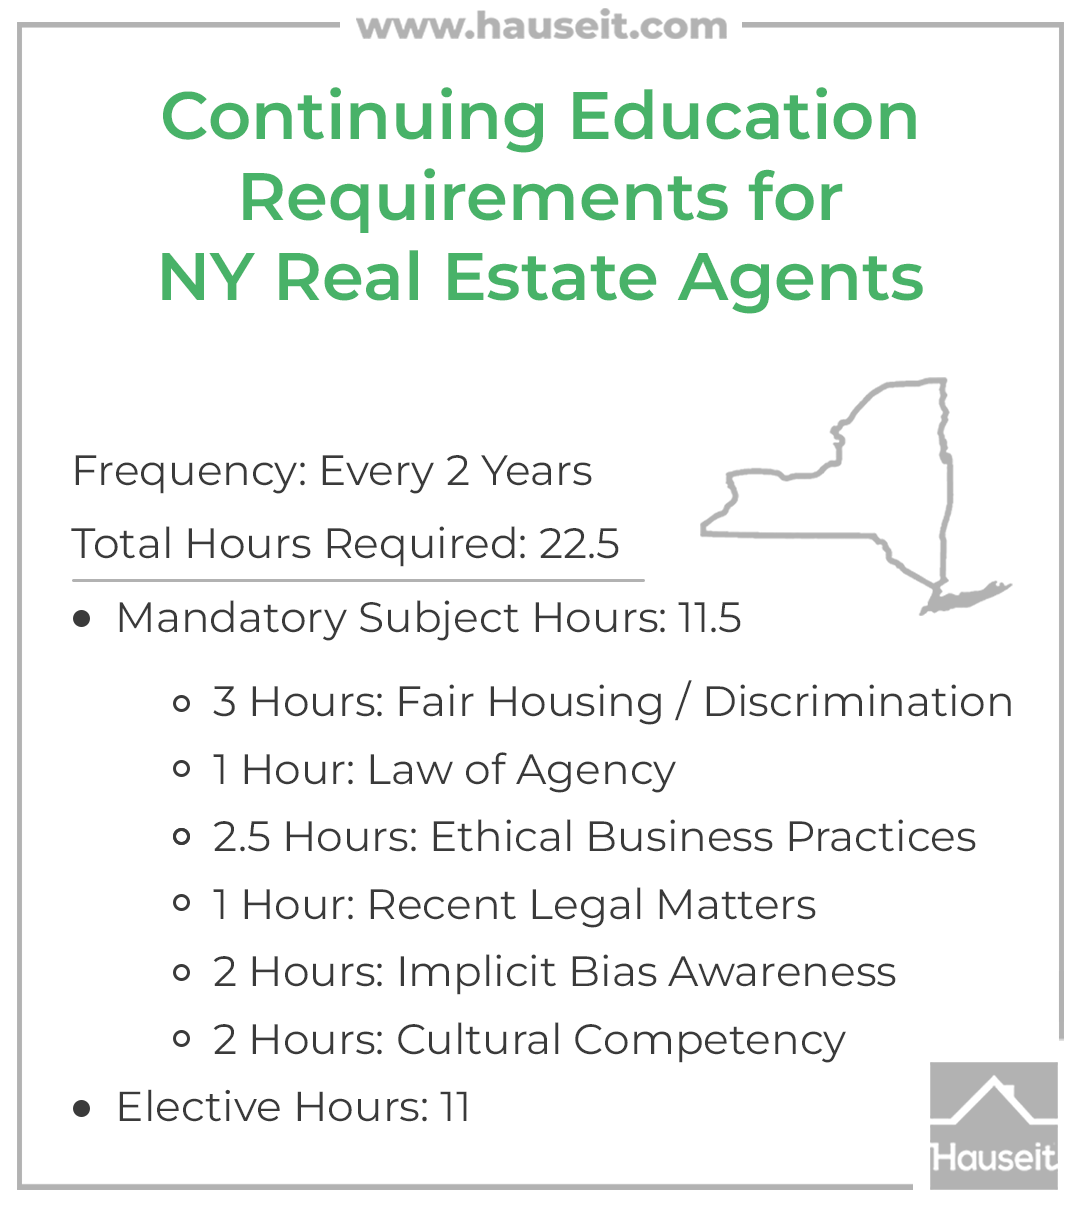 NY real estate agents must complete 22.5 hours of Continuing Education every 2 years, including 11.5 hours in specific subjects.